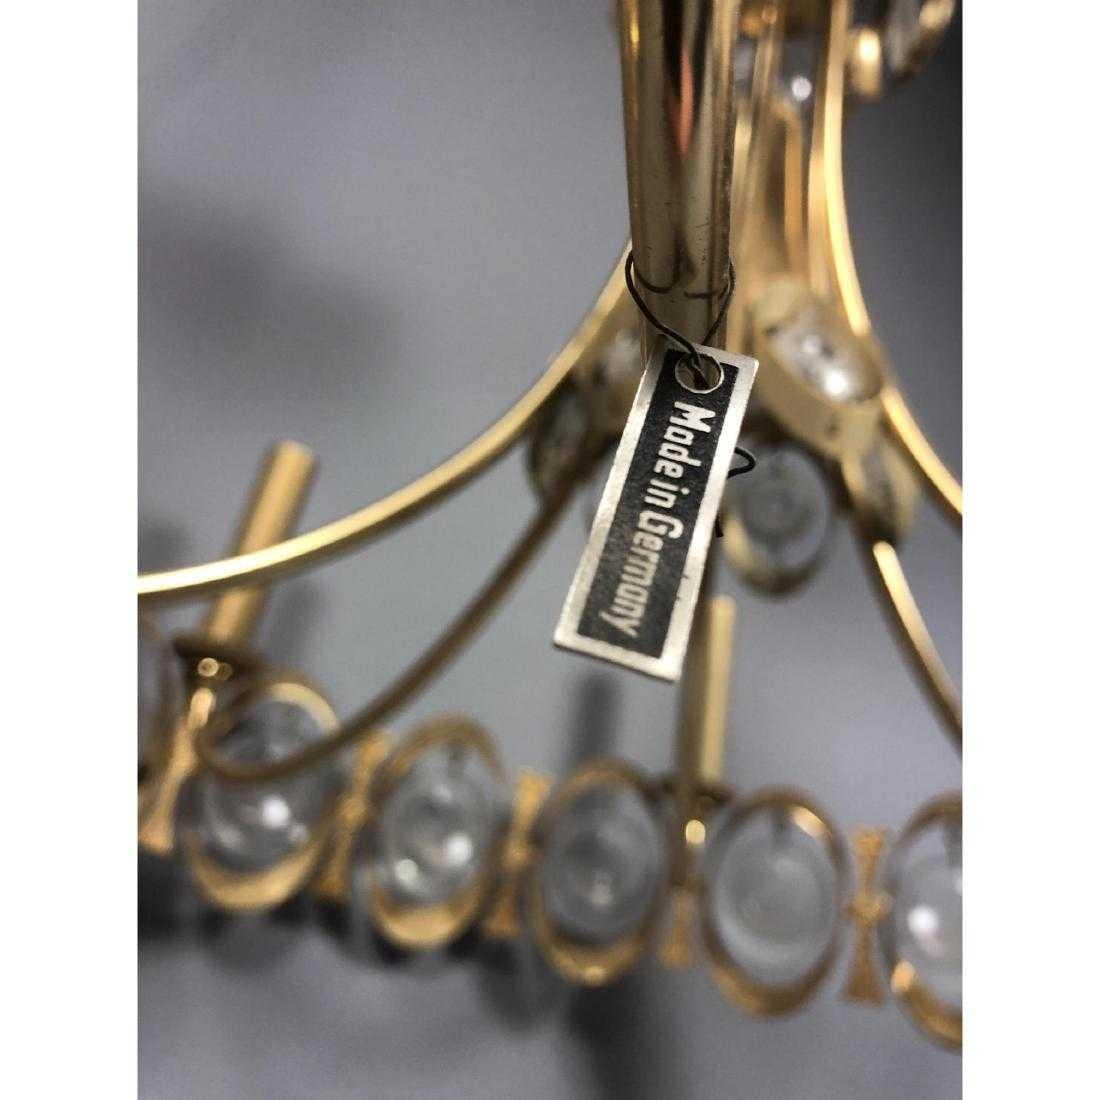 Show-stopping circa 1960s chandelier from German maker Palwa. Brutalist details. Glamorous hanging crystals in a mod disc shape. Six candelabra lights and a central bulb. Cut crystal ceiling plate. Made in Germany metal tag.

The fixture itself is